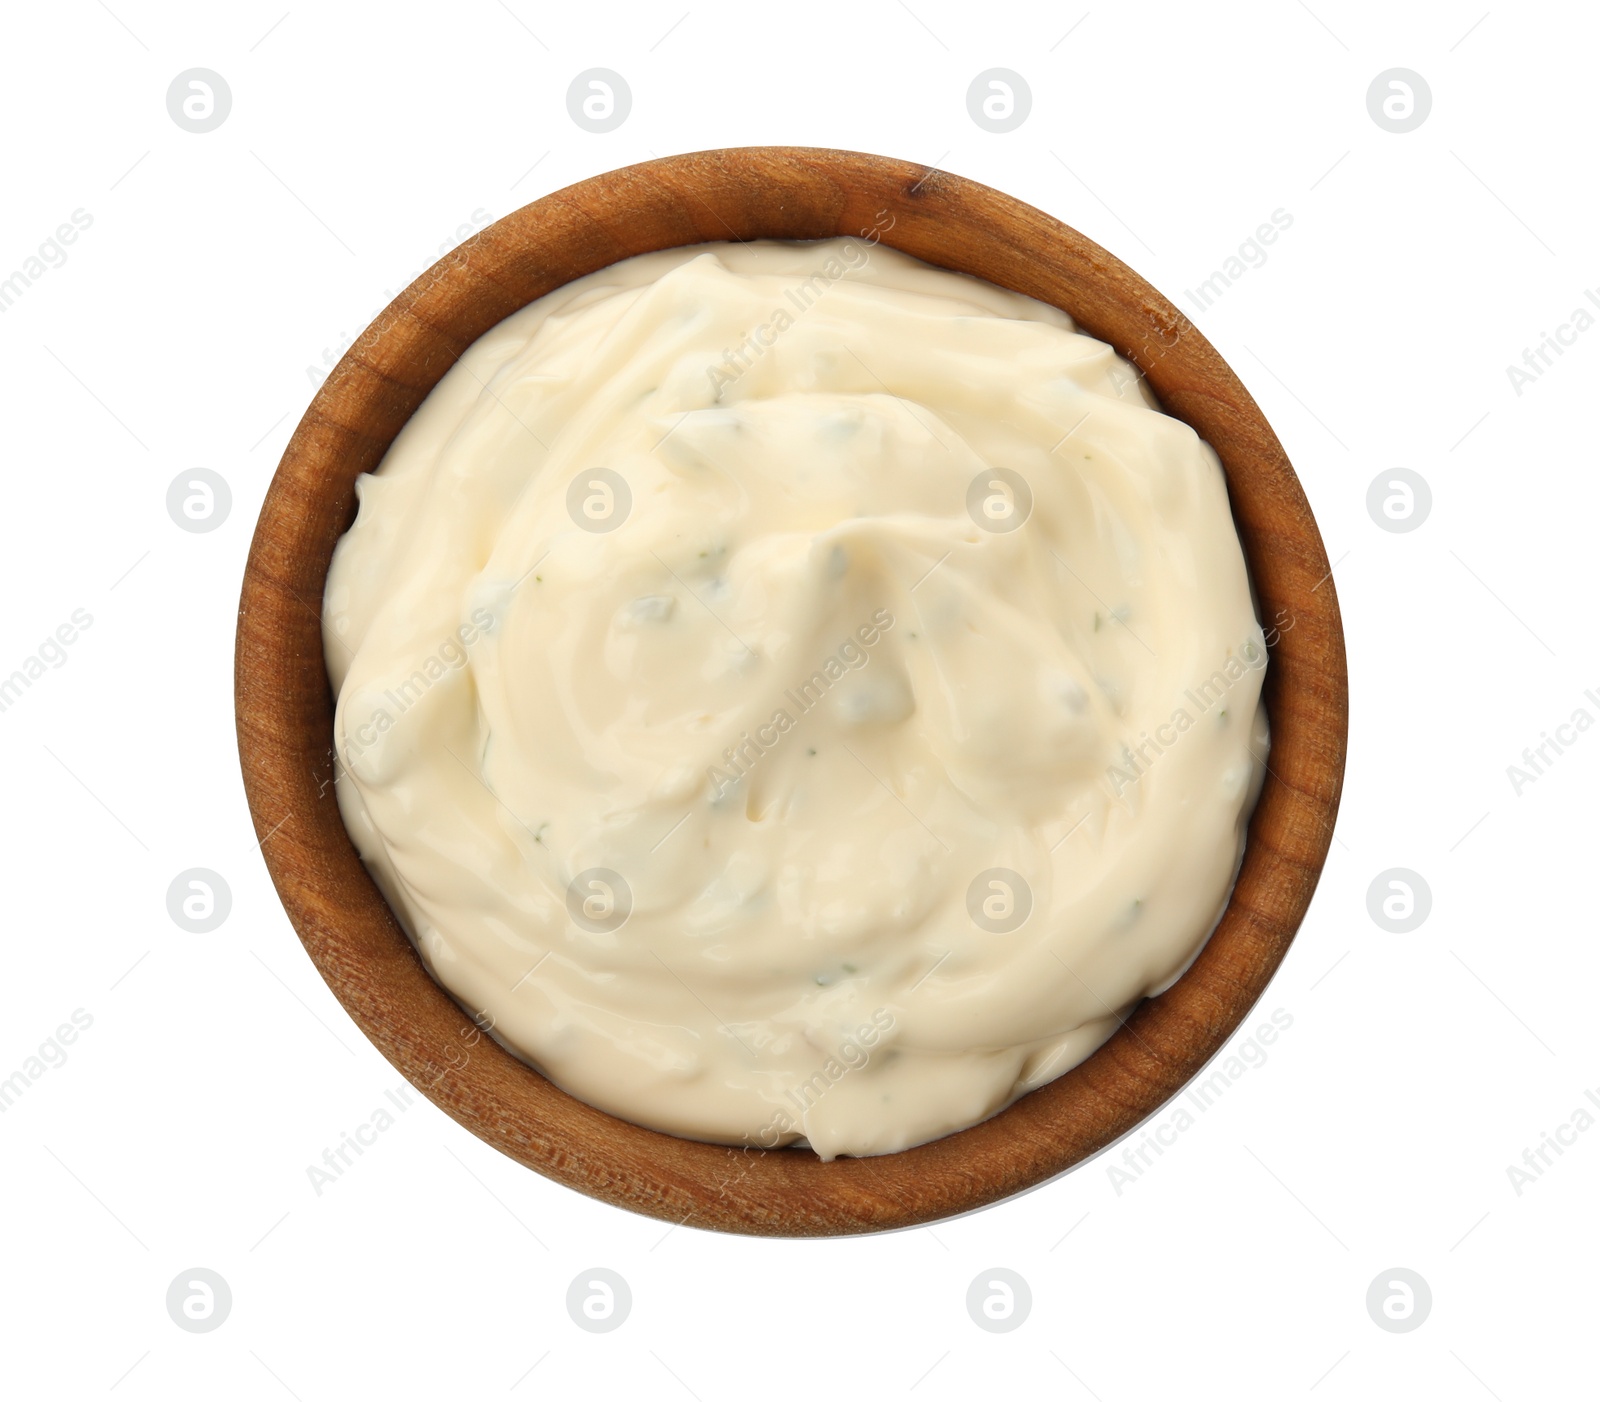 Photo of Tartar sauce in bowl isolated on white, top view